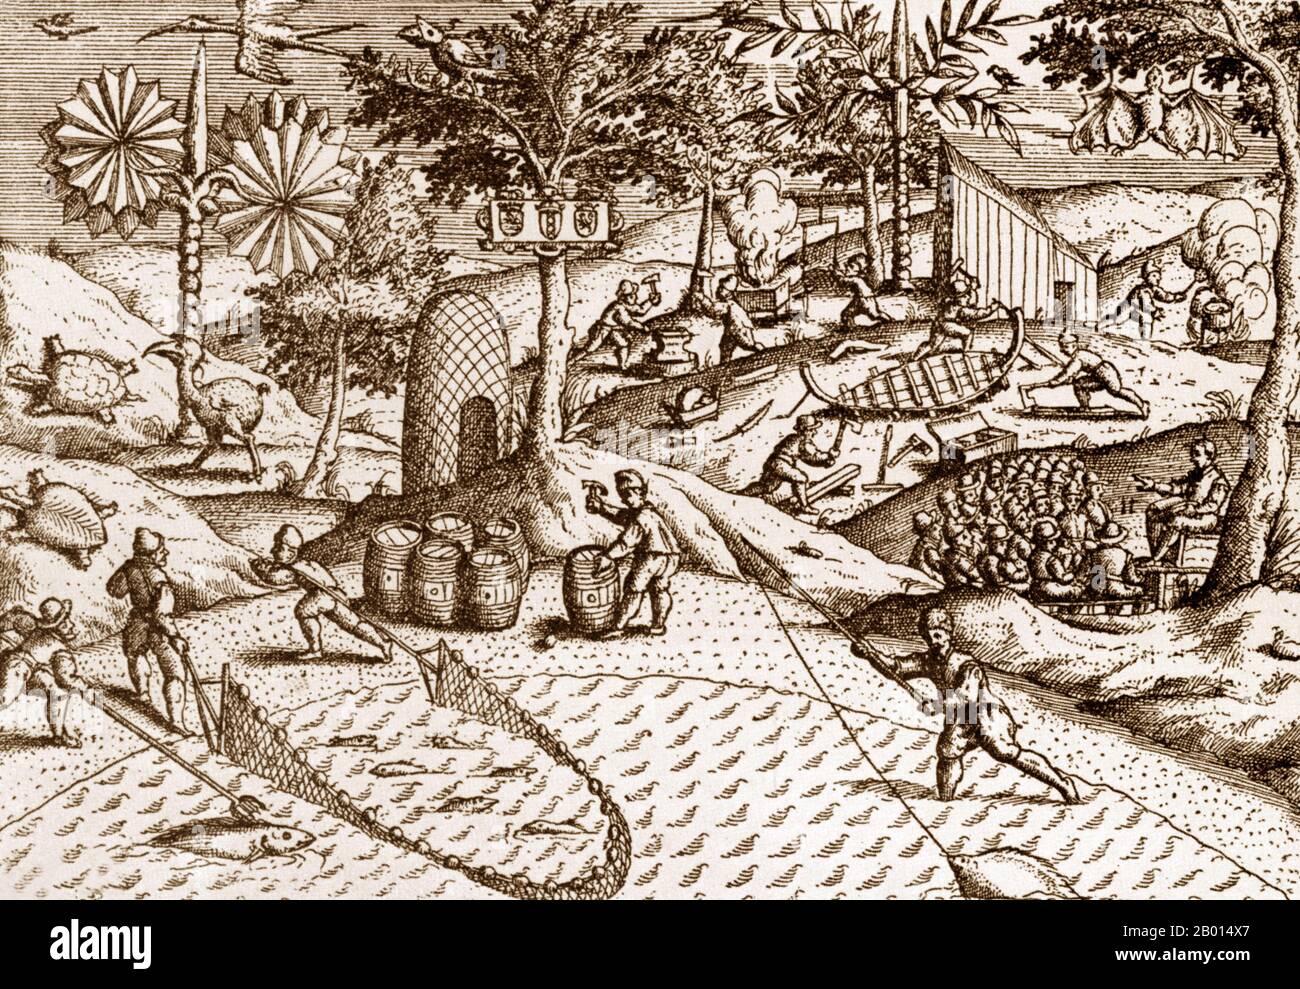 Netherlands/Mauritius: Van Warwijk’s sailors on the island of Mauritius, claimed by the Dutch in 1598. Note the Dutch coat of arms nailed to a tree in the centre, making it clear who is colonising the island. Copper engraving by Johann Theodor de Bry (1561-1623), 1601.  Situated some 900 km east of Madagascar, the island of Mauritius was a tantalisingly ideal port for medieval European explorers en route to India and the East Indies. It was also unpopulated but for animals, including the dodo bird. First came the Dutch: Wybrant van Warwijk claimed the island of Mauritius for Holland in 1598. Stock Photo